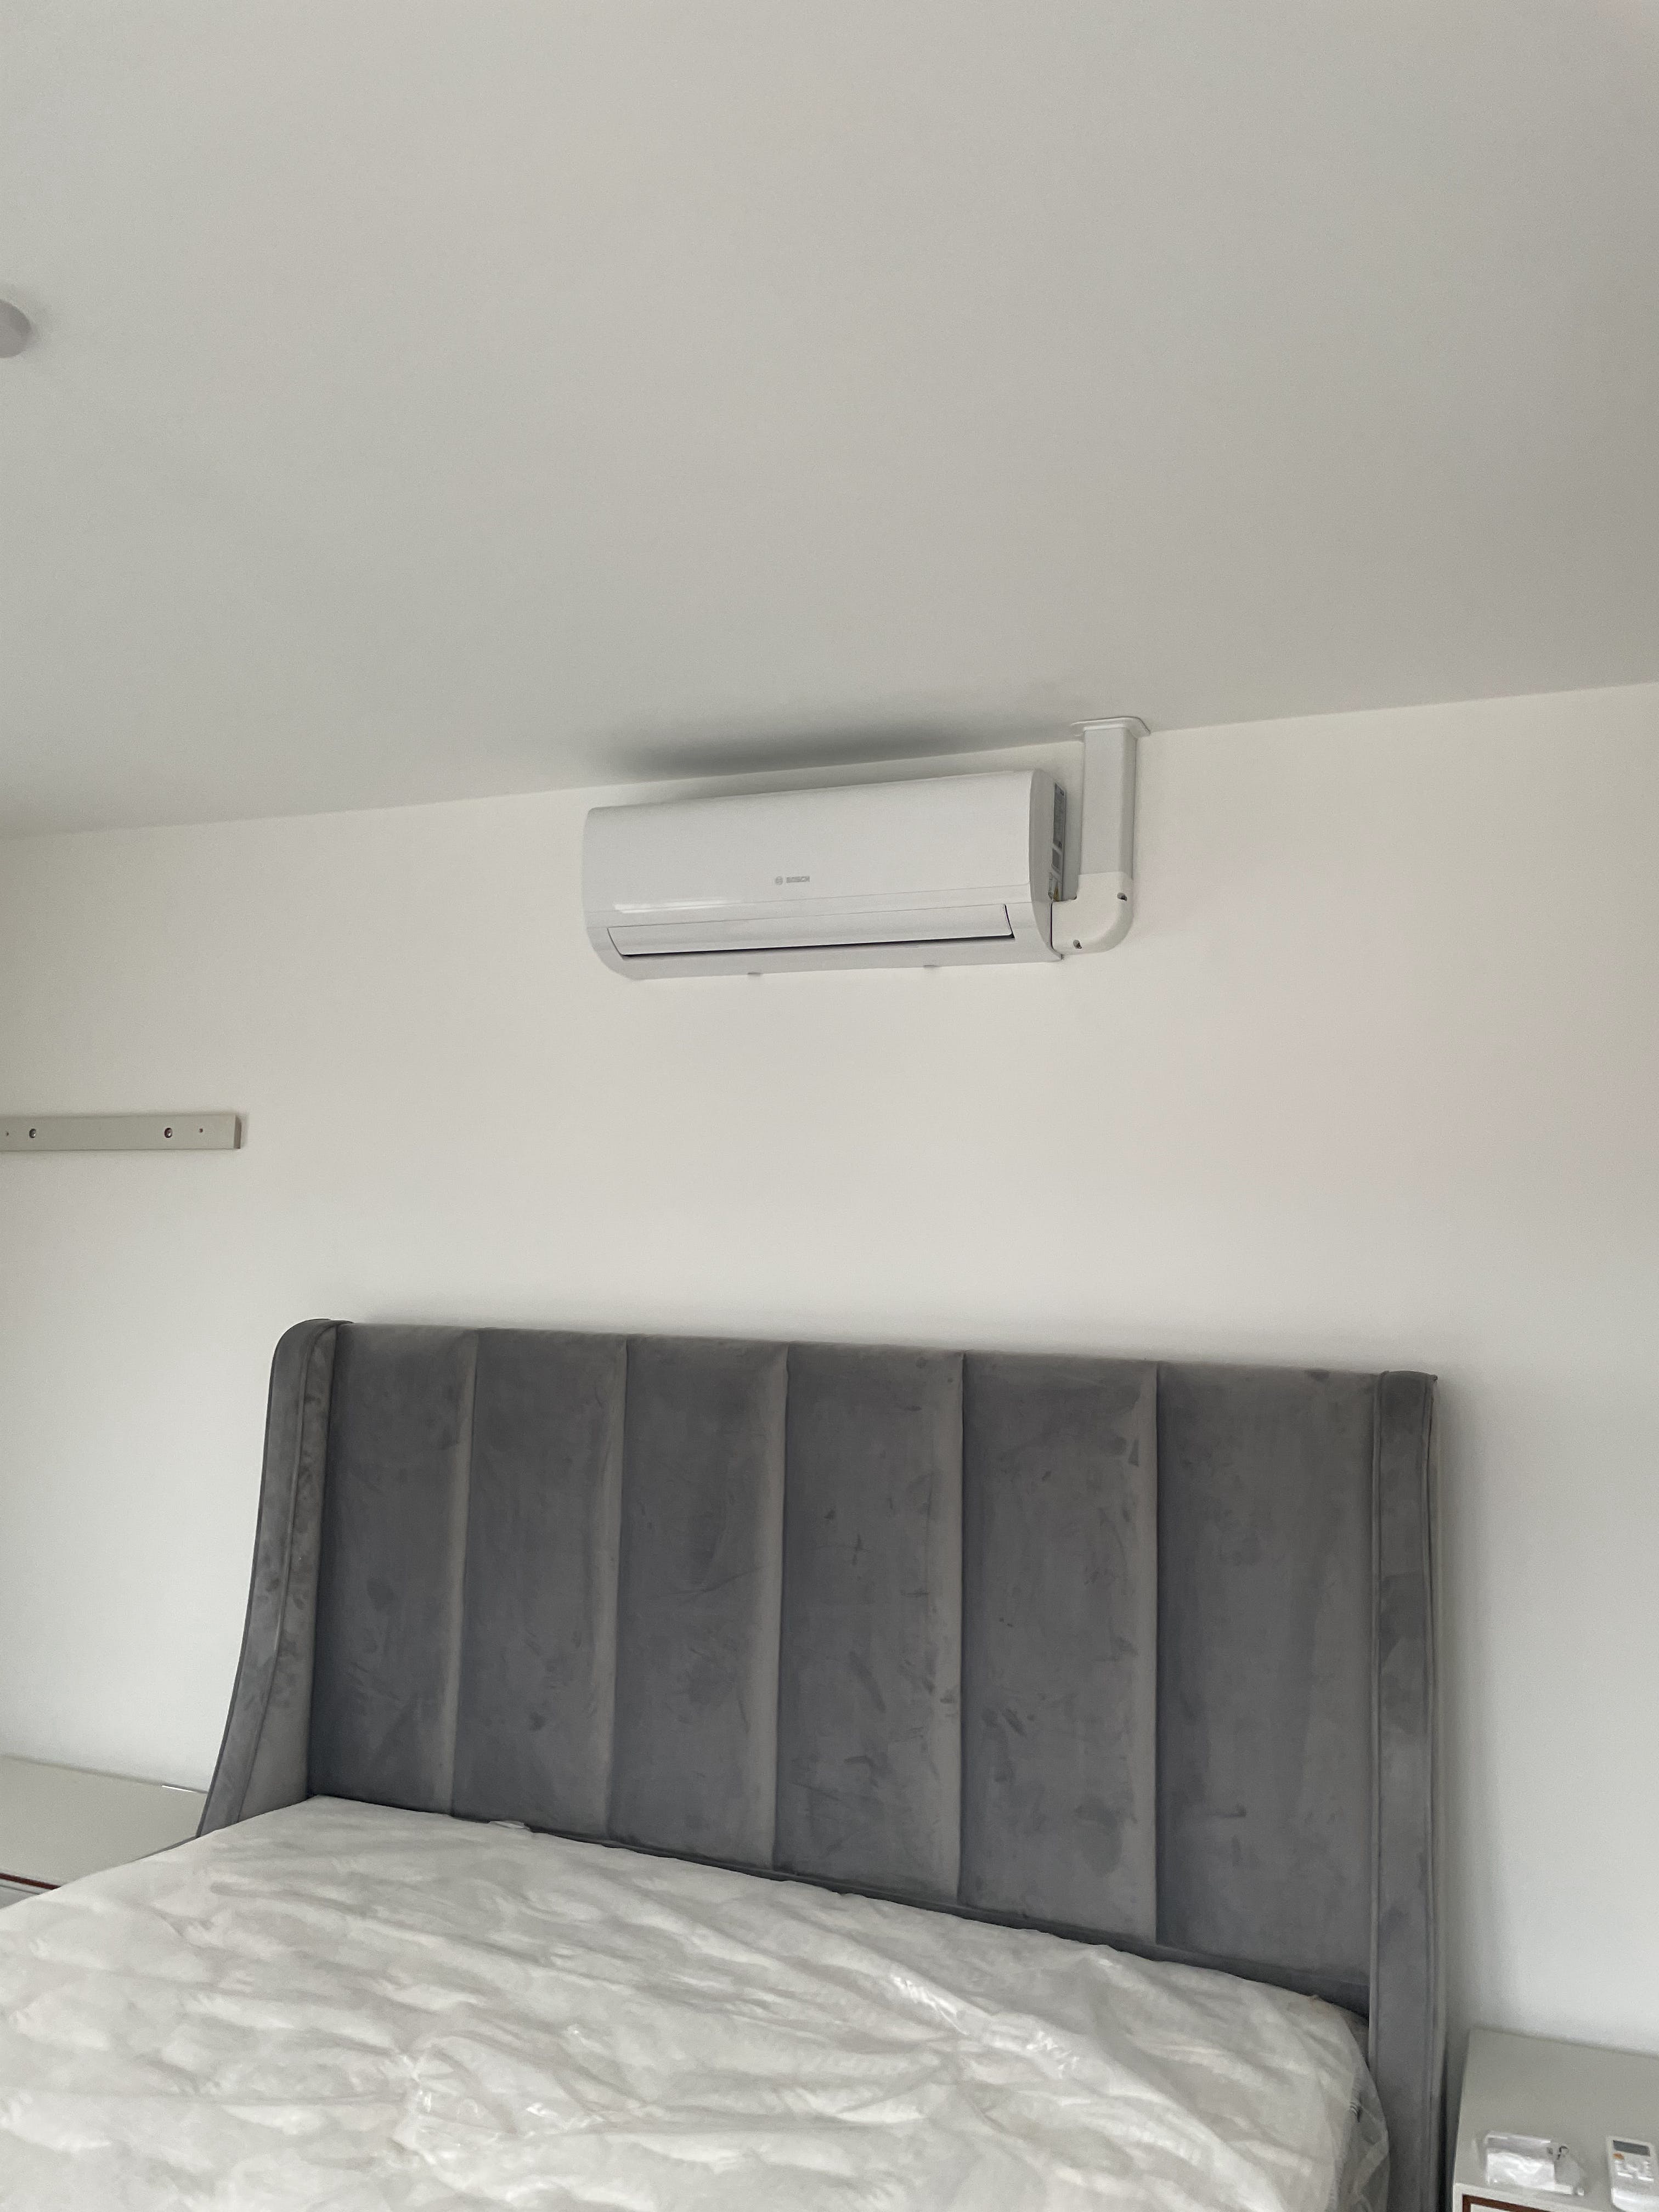 Bedroom Air Conditioning